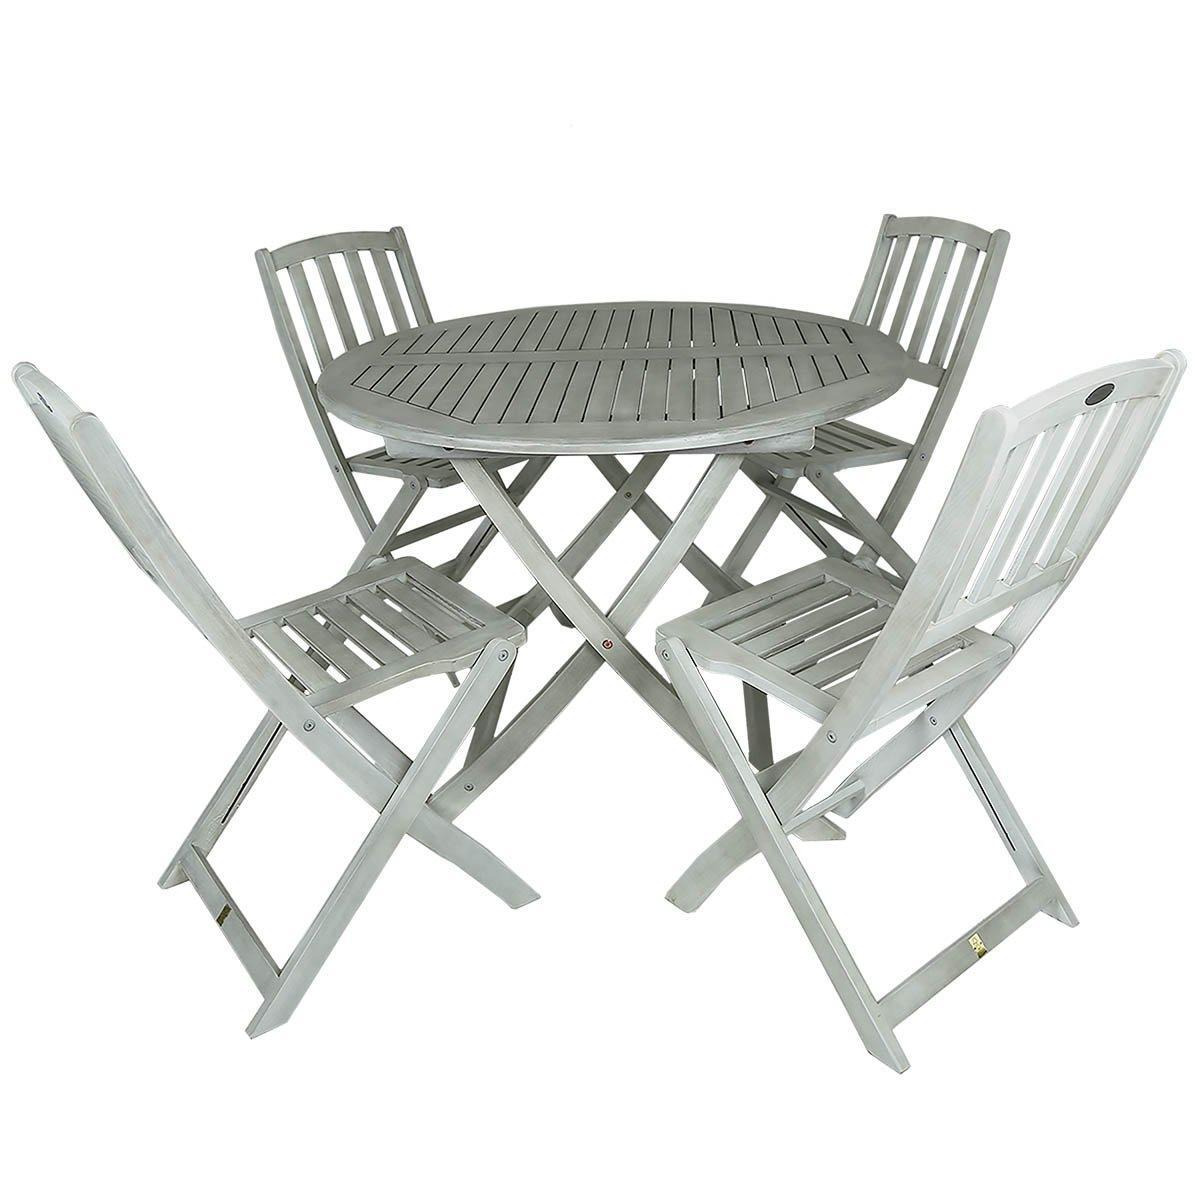 Acacia White Washed Wooden Outdoor Patio Dining Set - 4 Seat - image 1